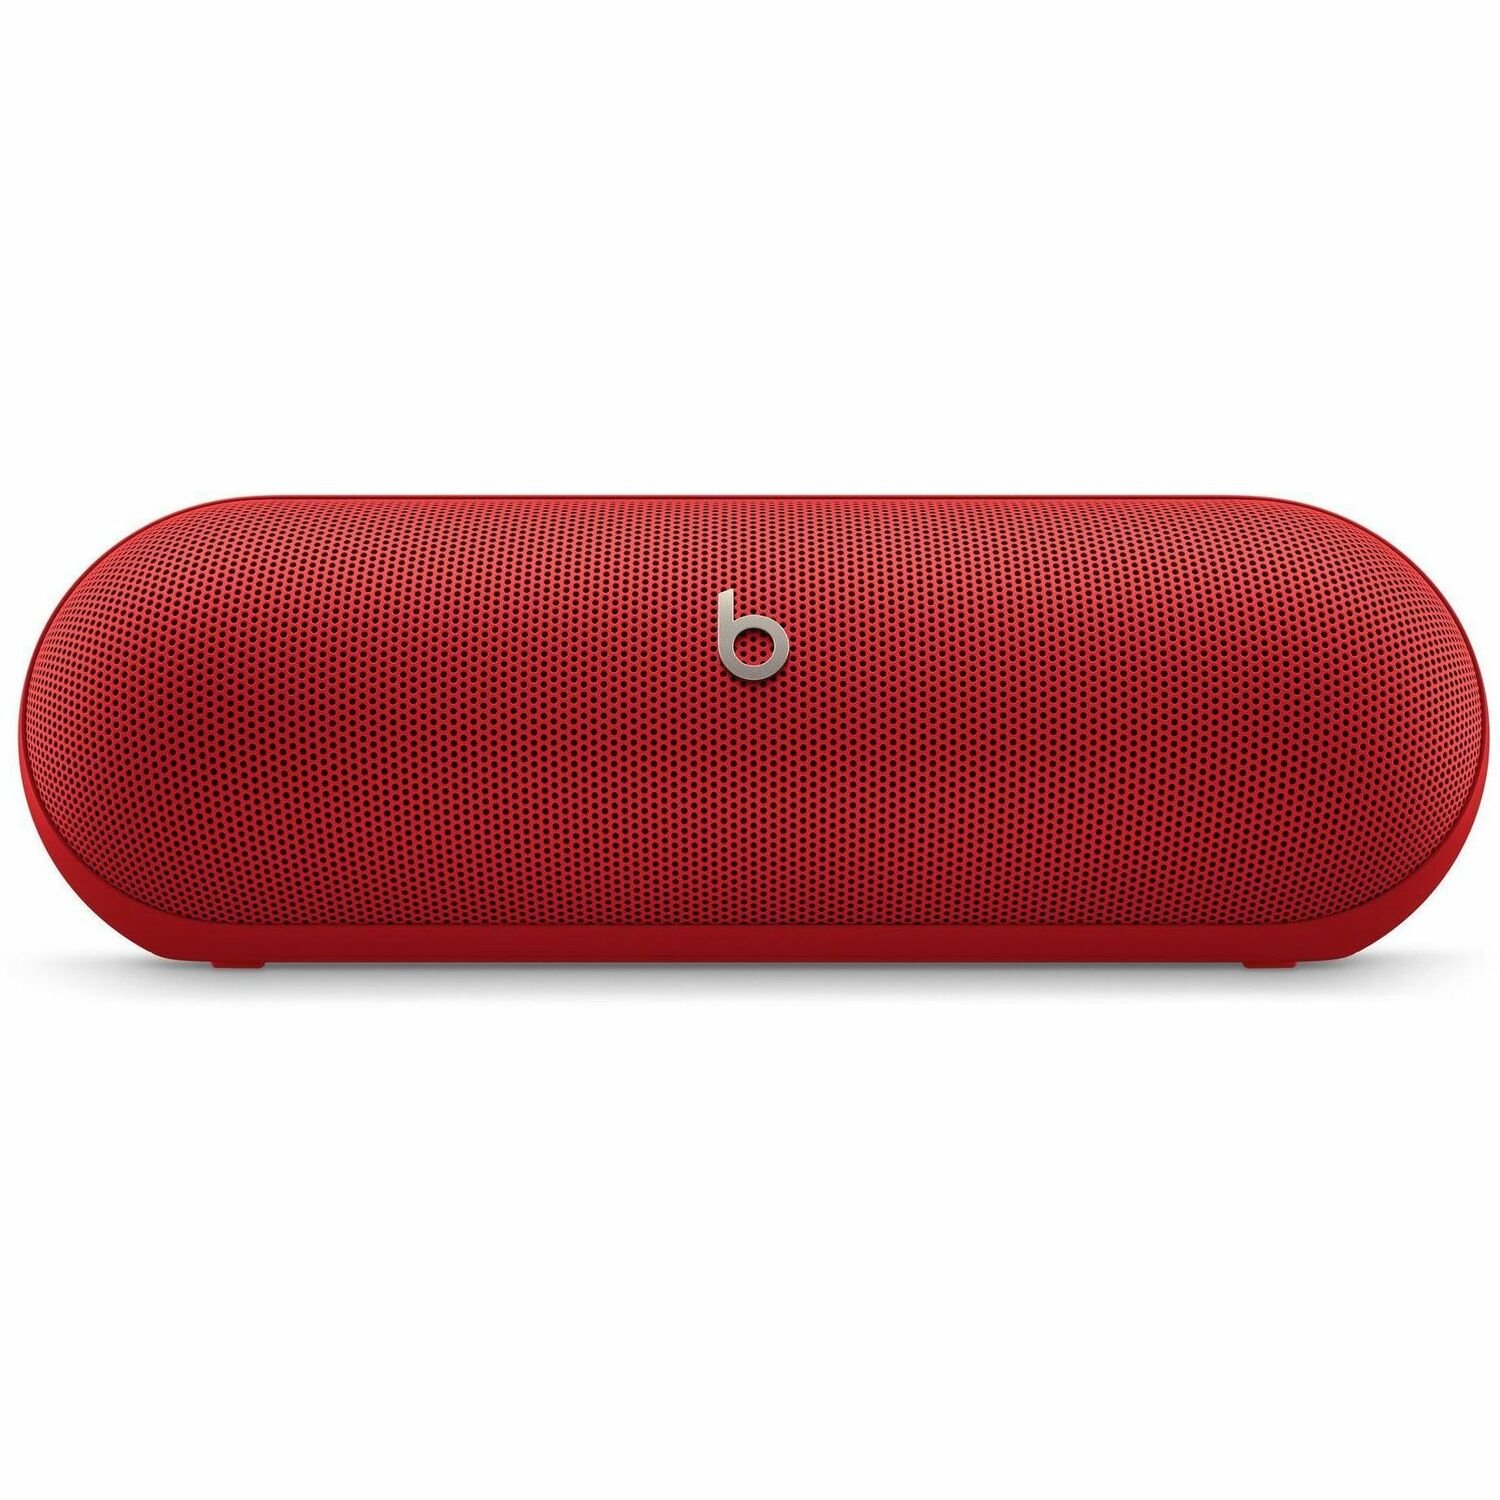 Apple Beats Pill Portable Yes Smart Speaker - Flaming Red